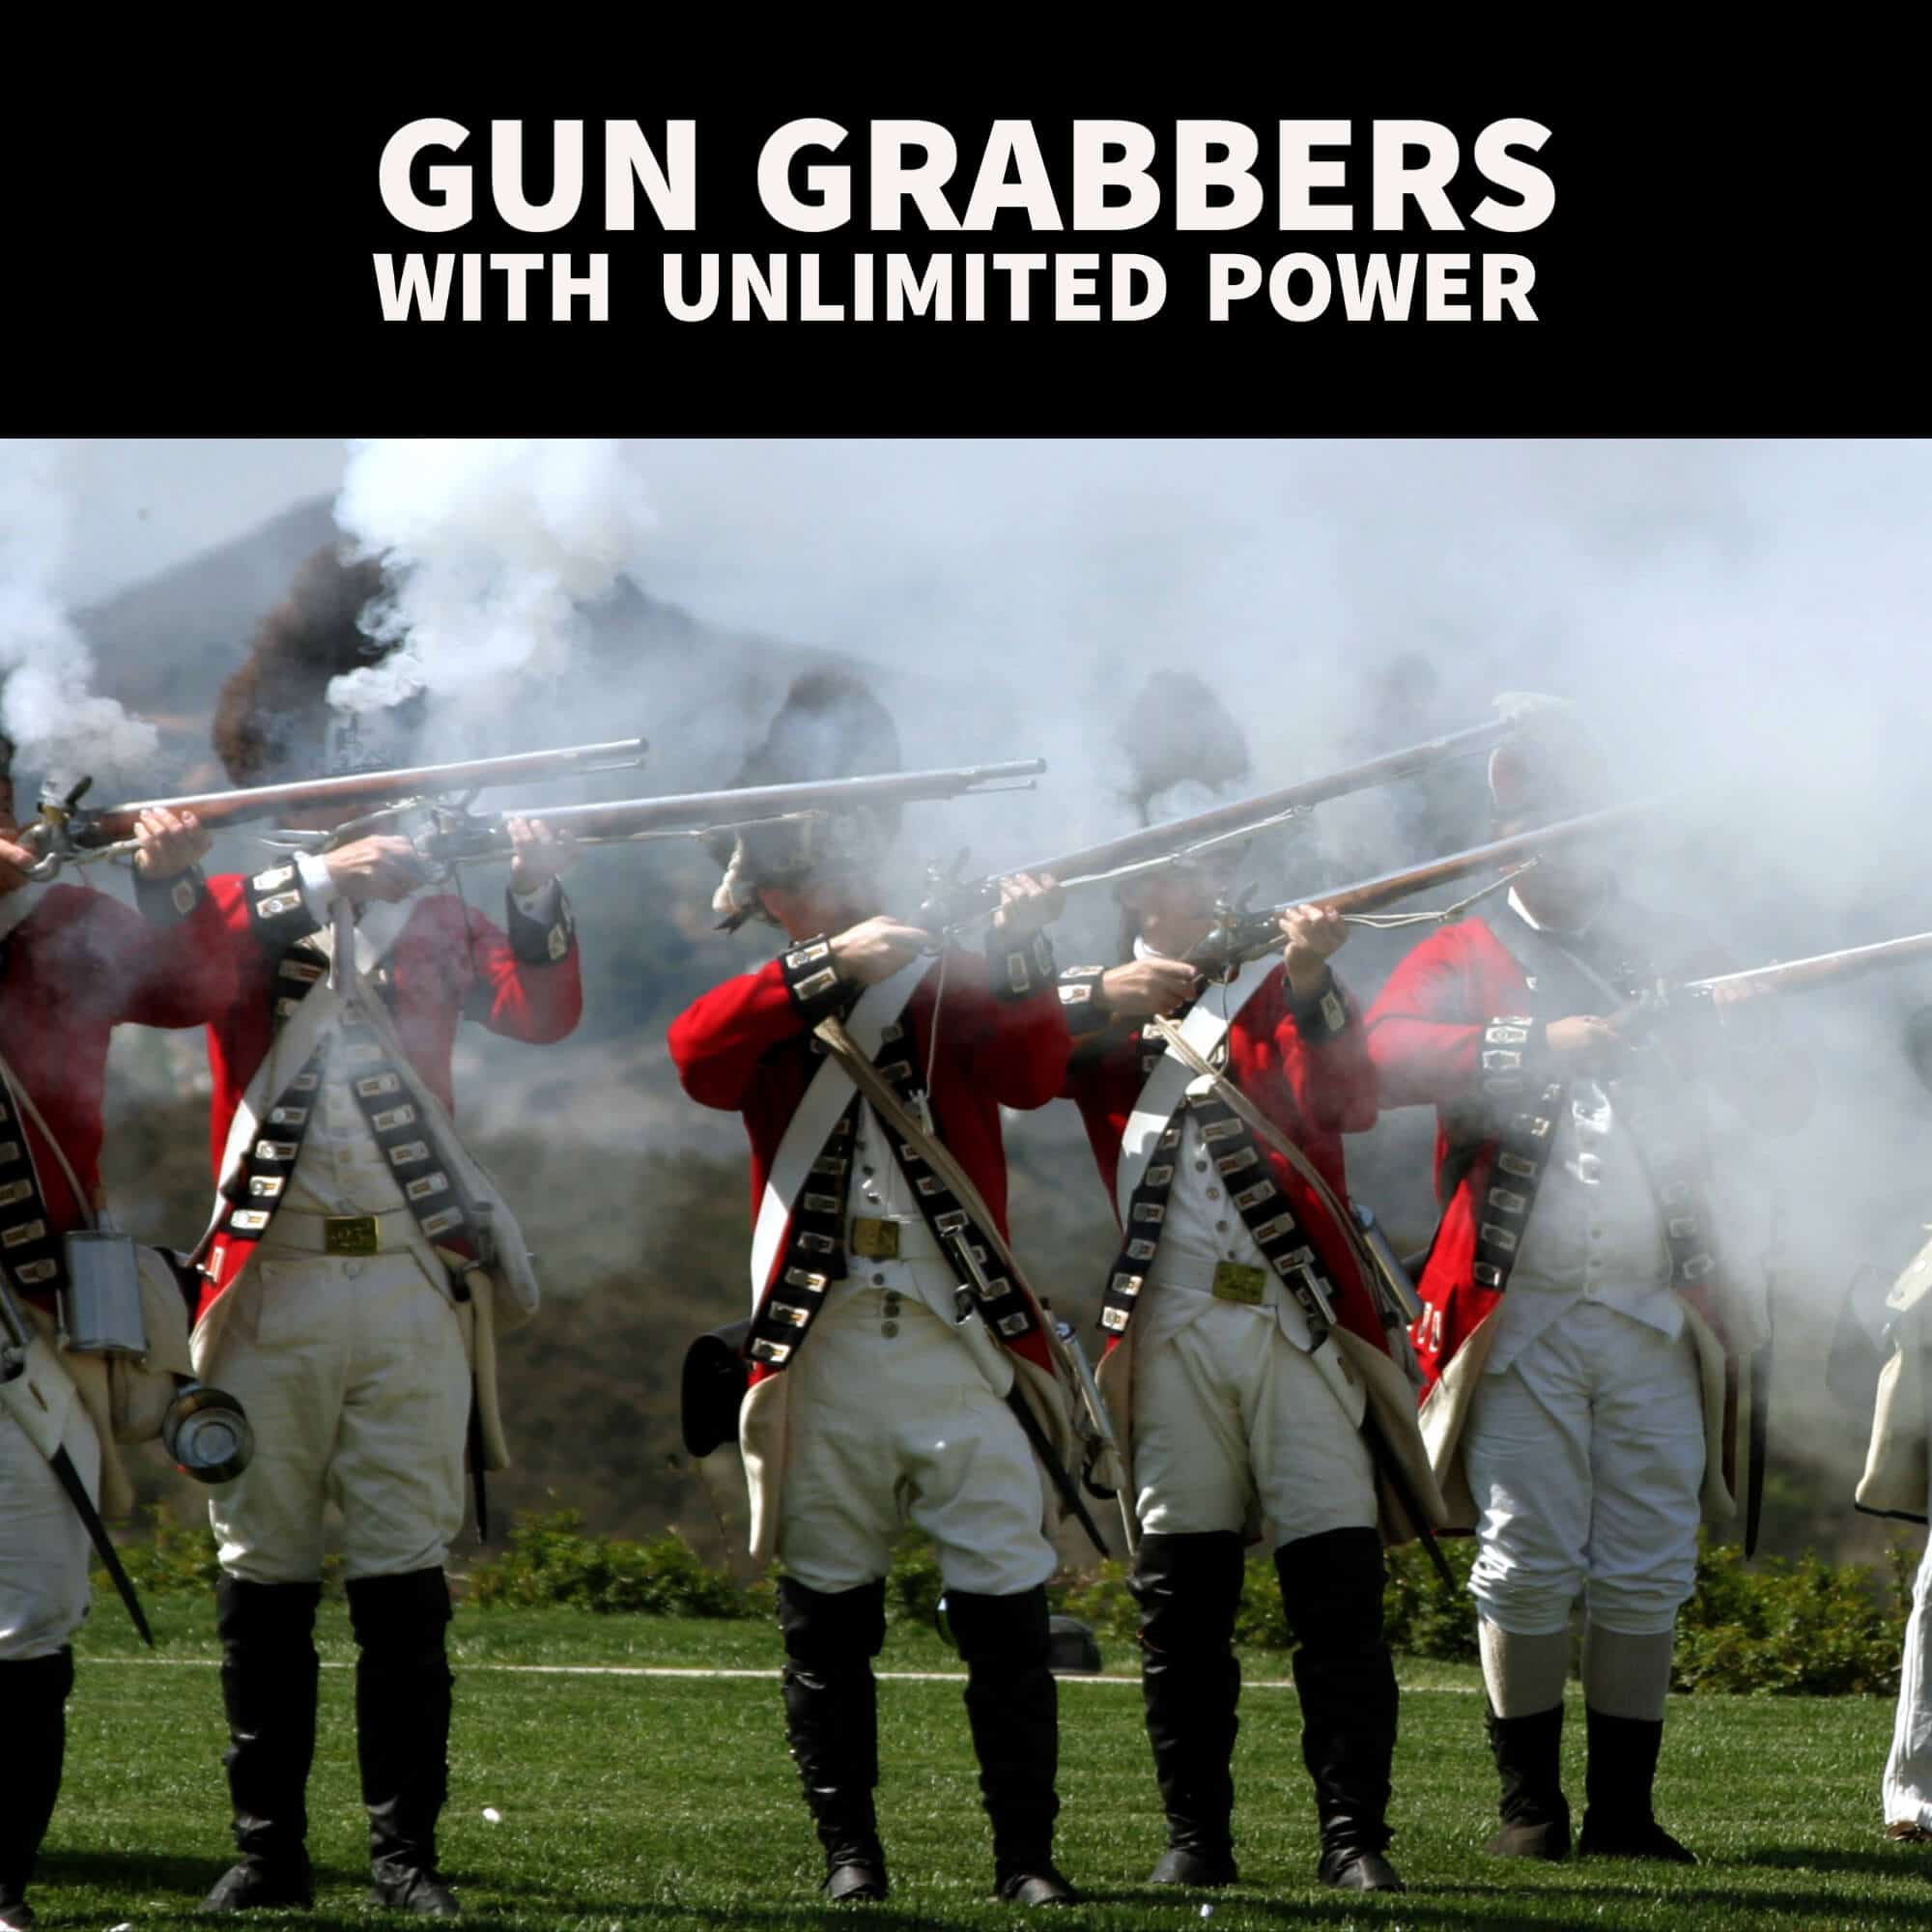 Unlimited Supremacy, Gun Control and the American Revolution